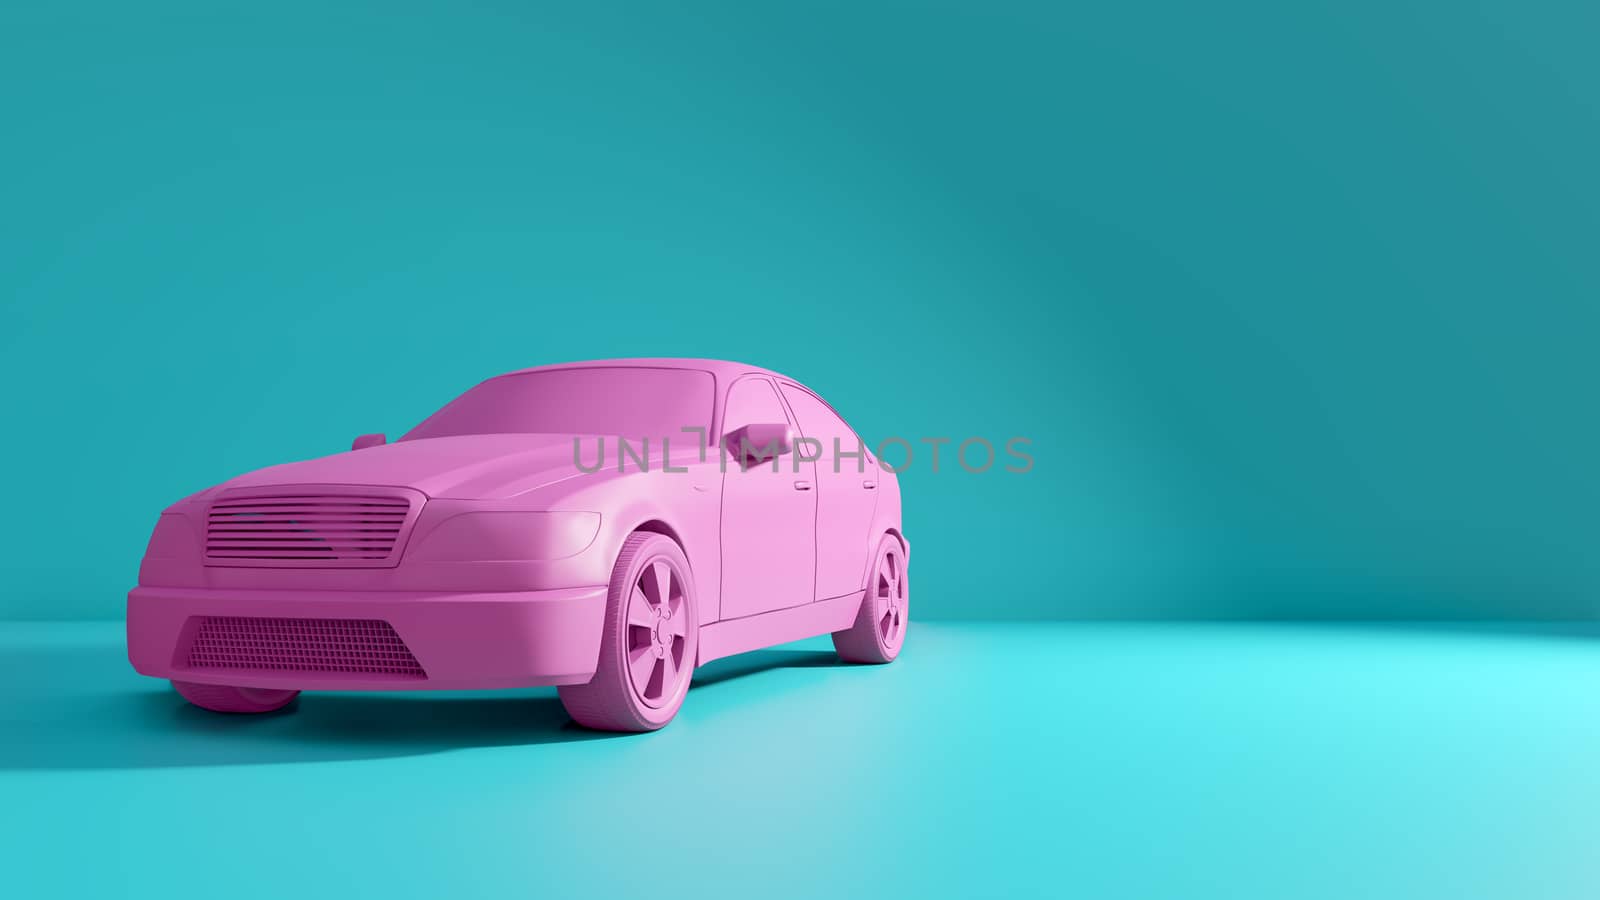 Styled 3D illustration of the pink car on blue background